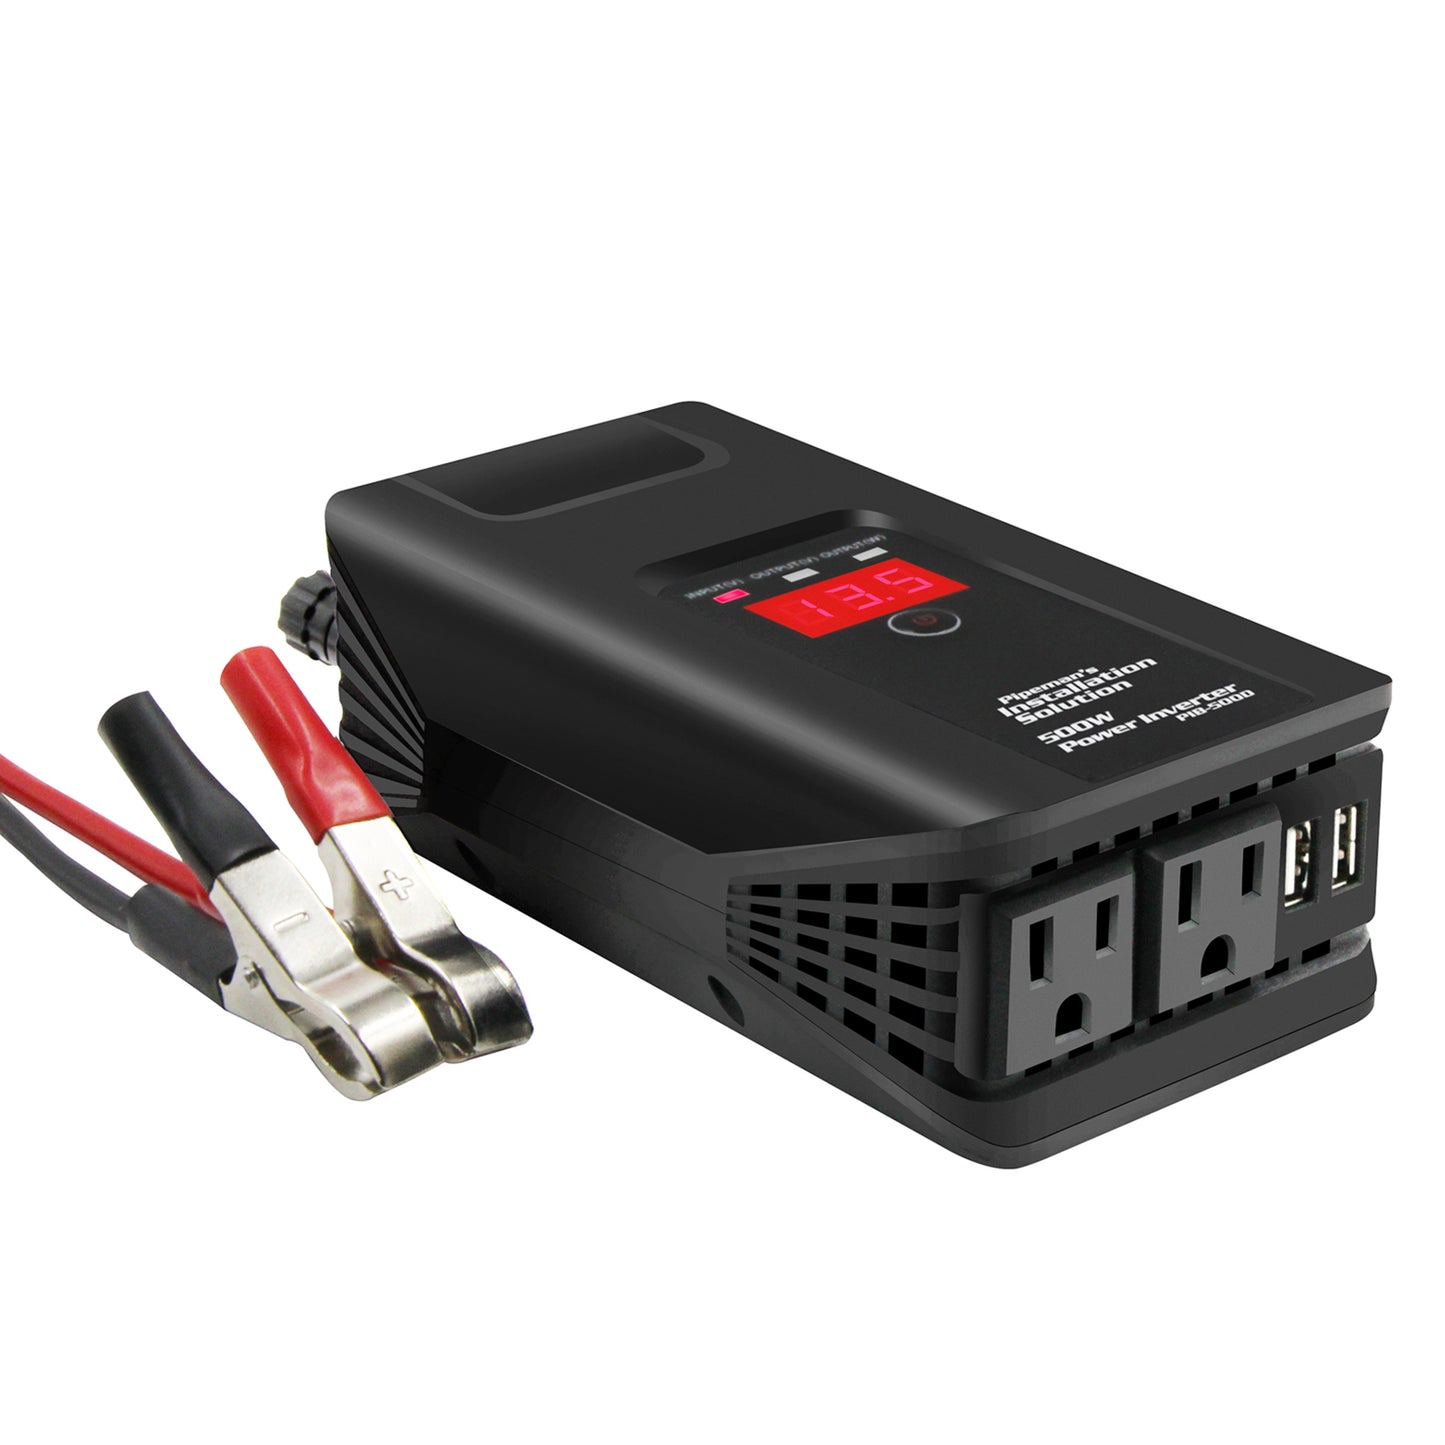 PIB-500D - 500 Watts 12V DC to 115V AC Power Inverter with Dual USB Output